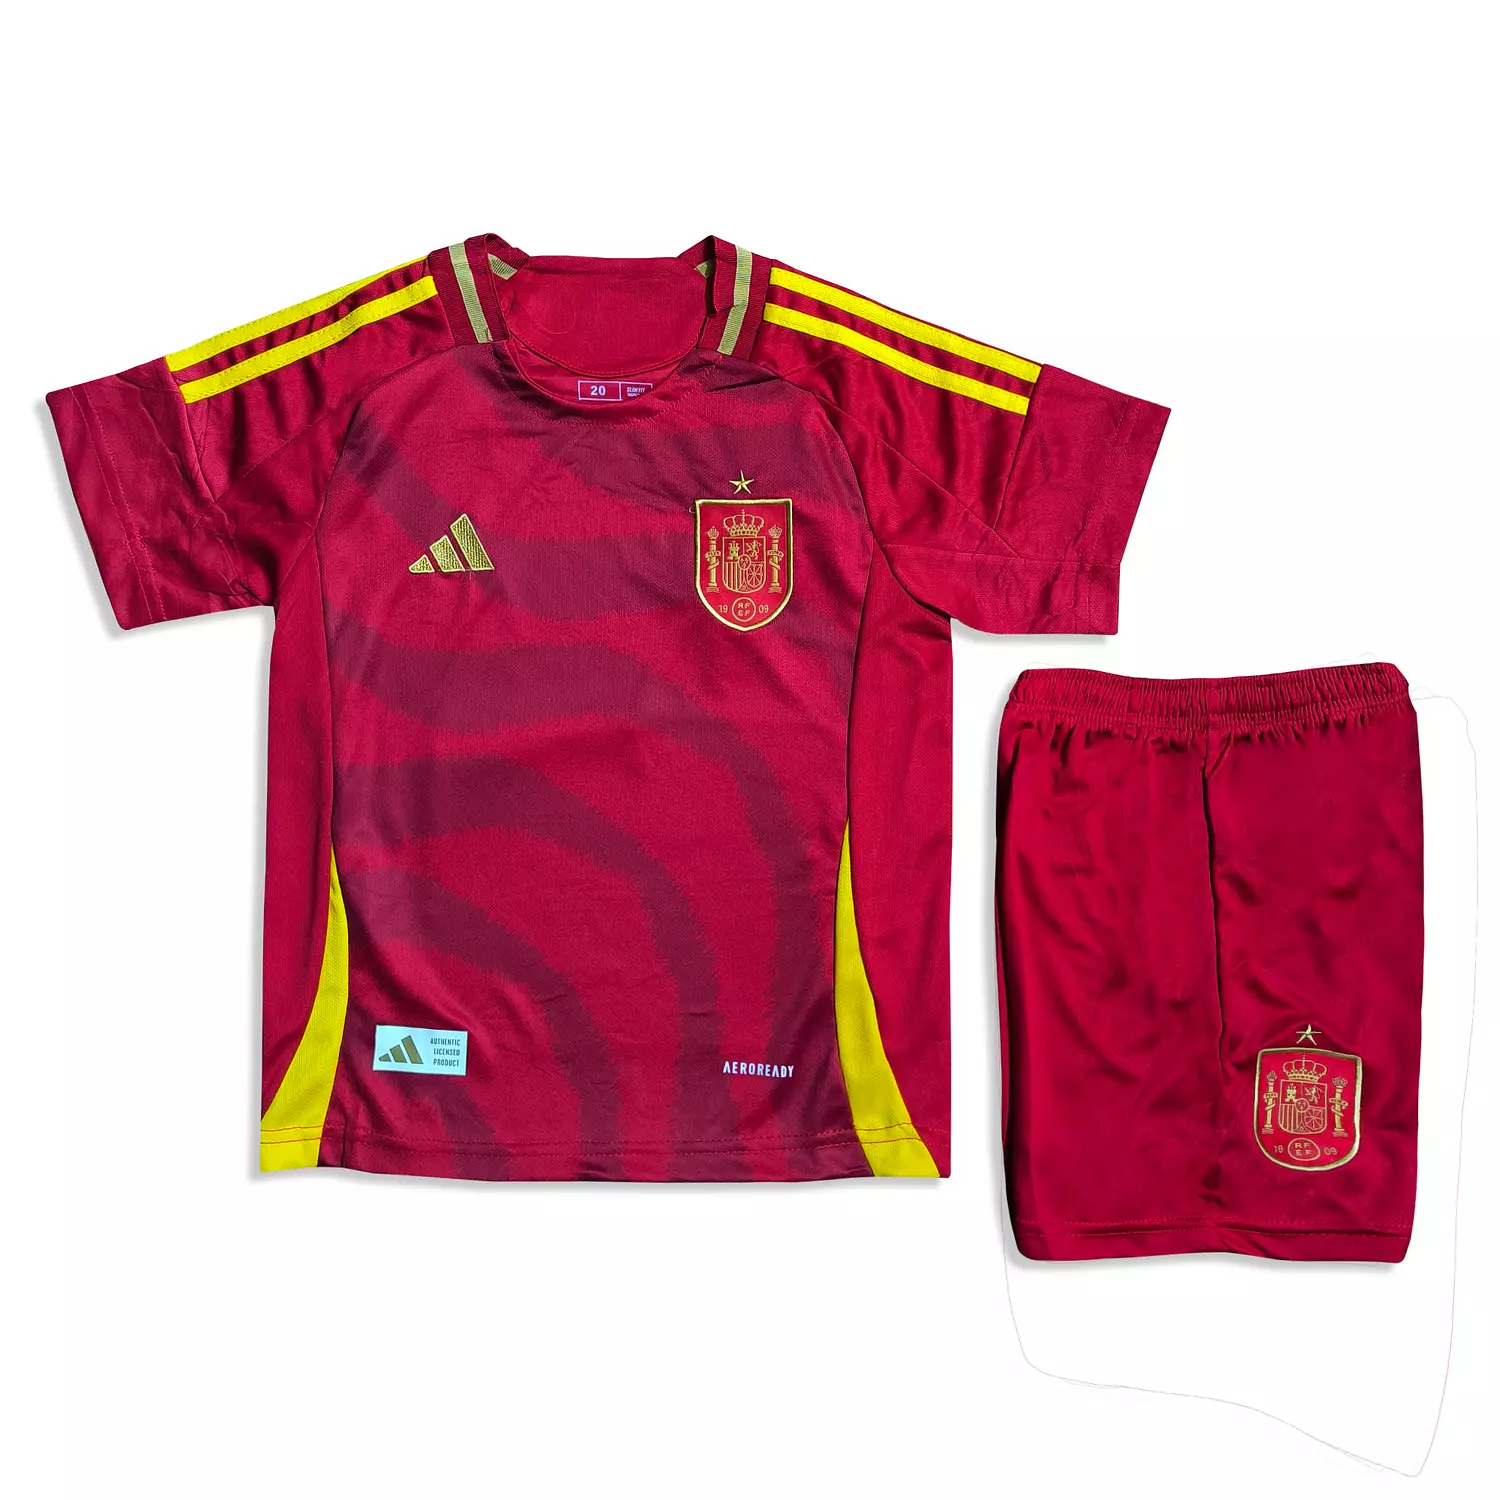 SPAIN EURO 24 - KIDS hover image